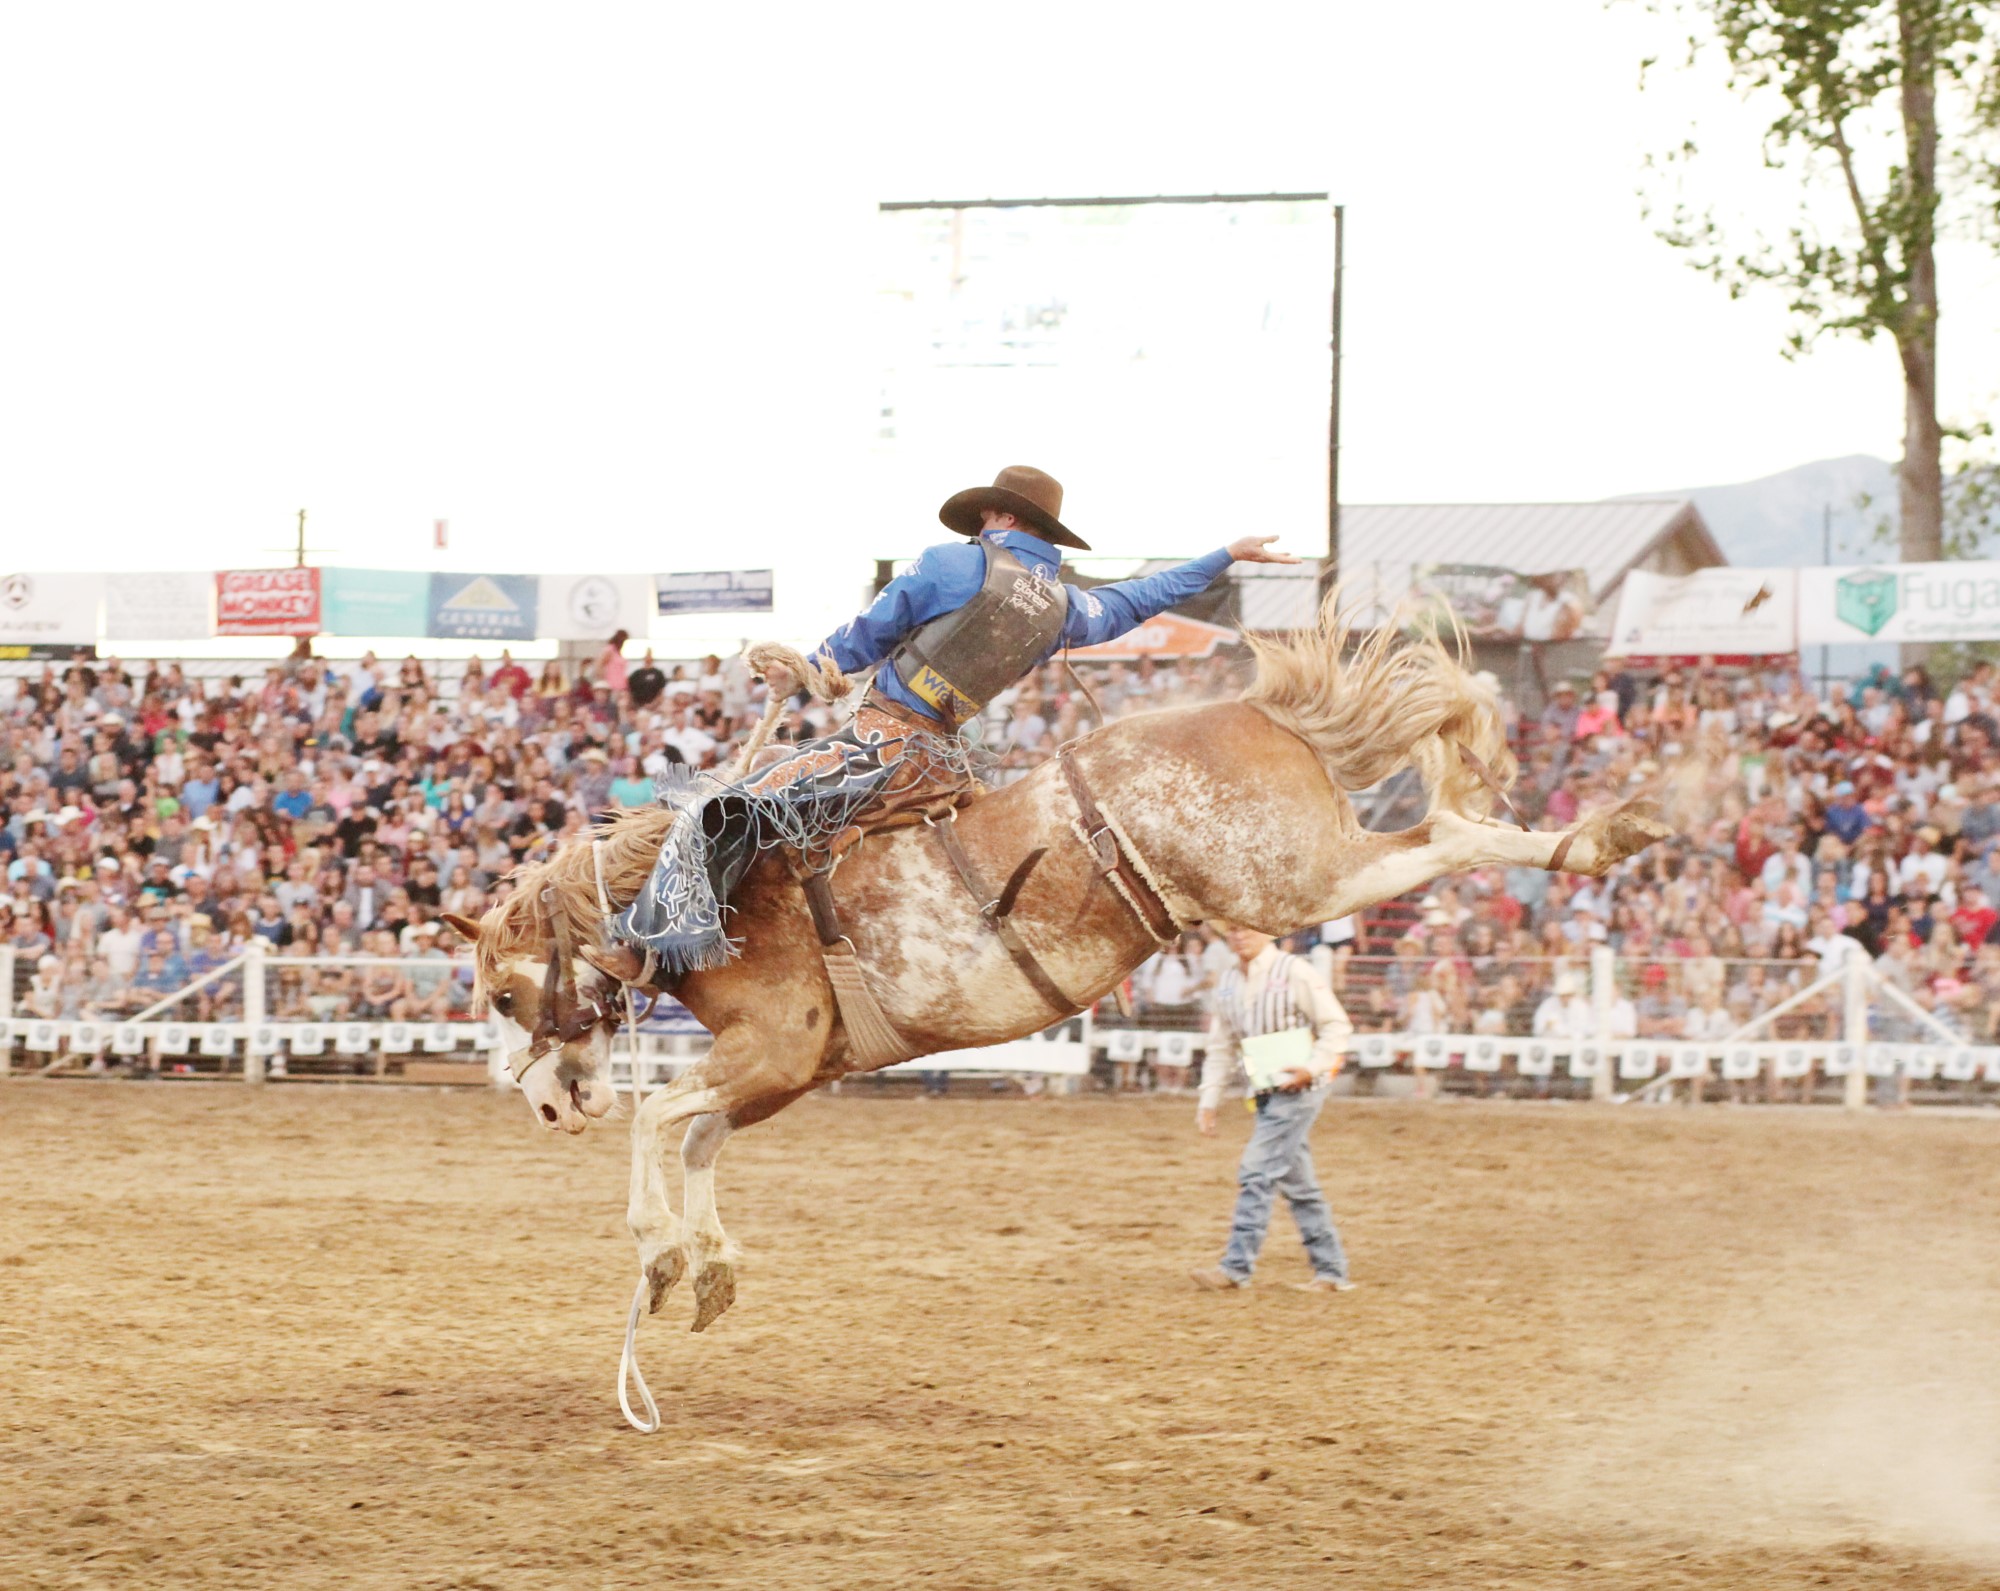 man on horse during rodeo